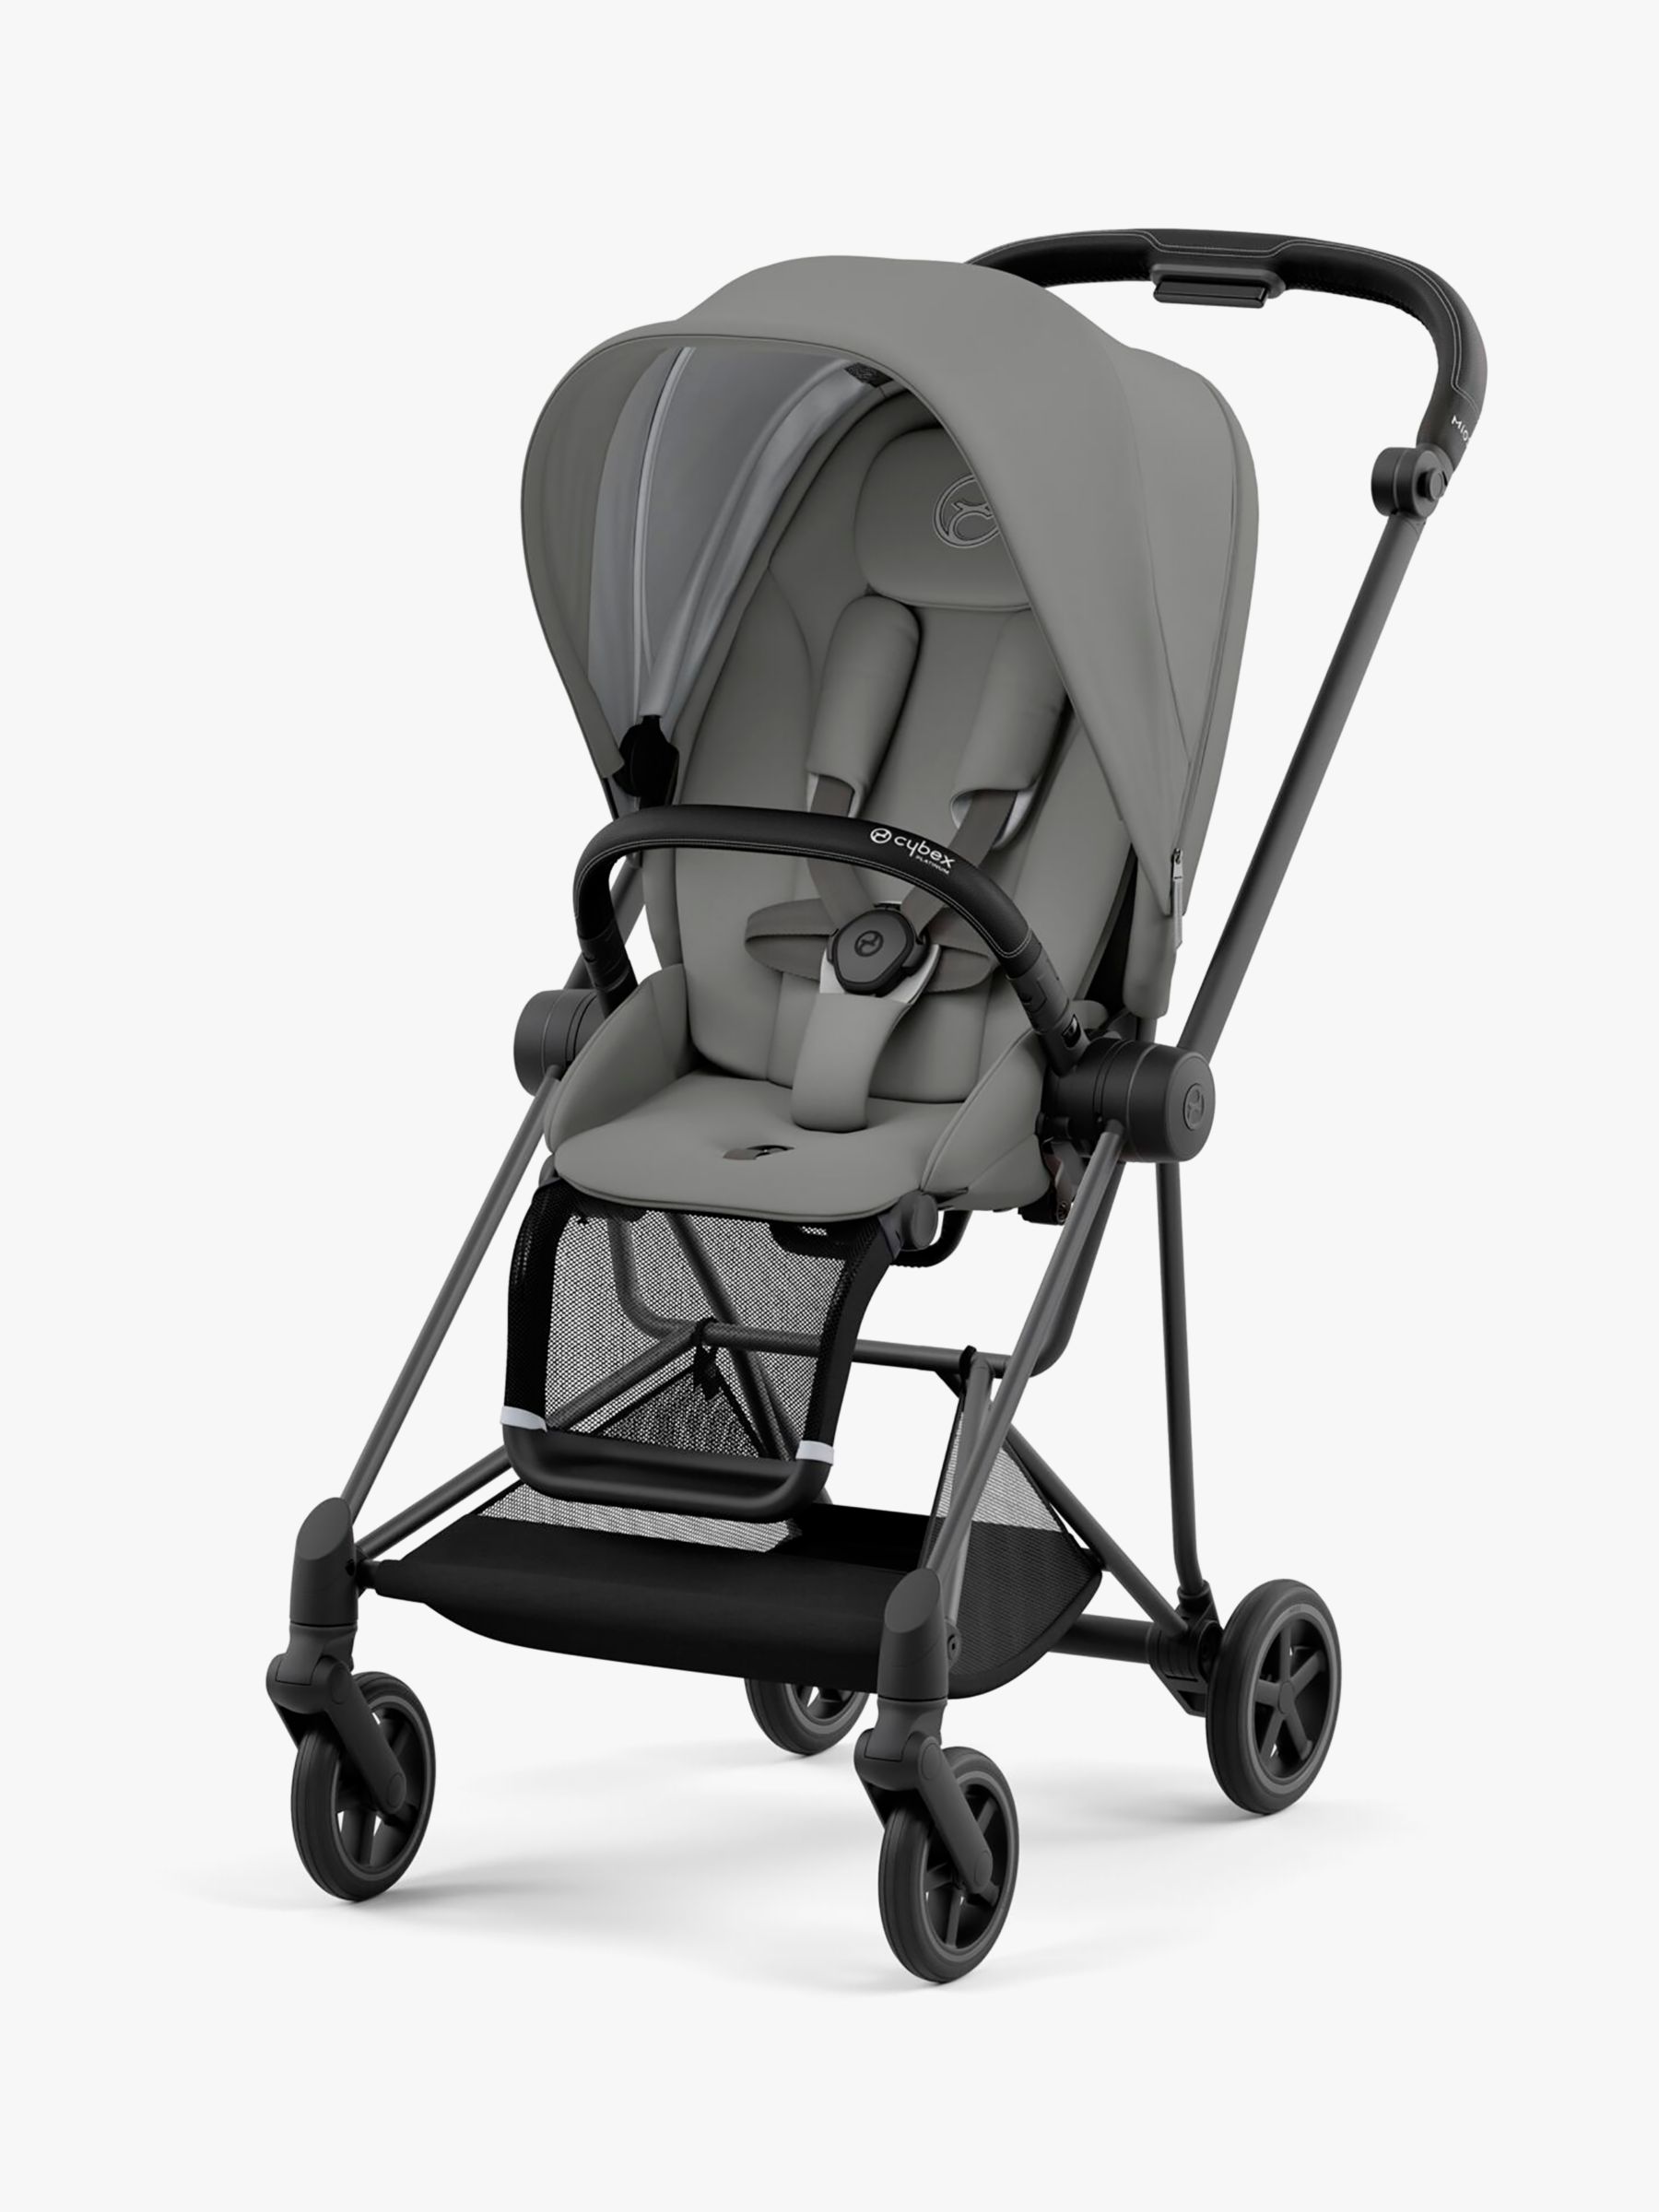 Cybex Mios Pushchair Chassis & Seat Pack Bundle, Matte Black/Soho Grey